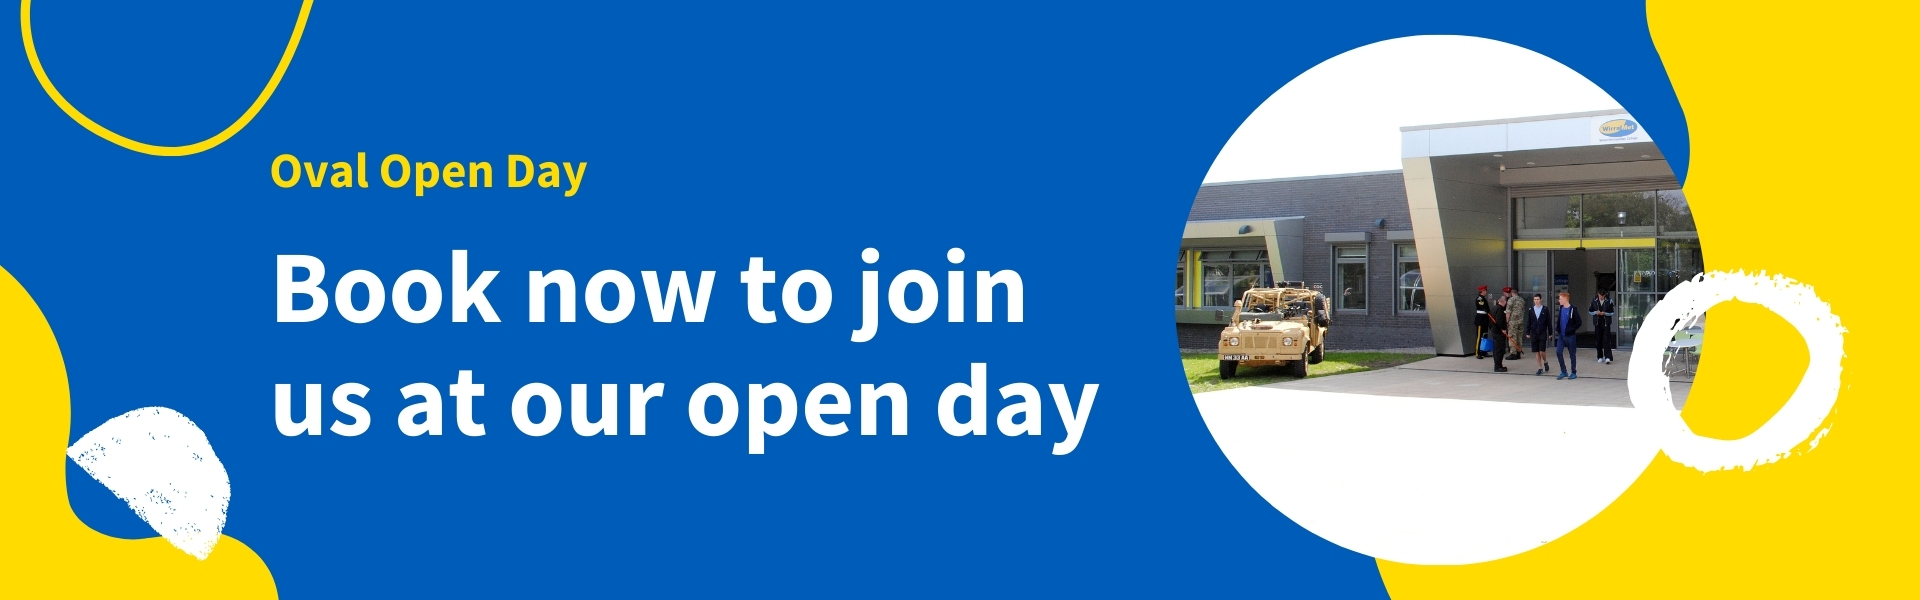 book now to join us at our open day